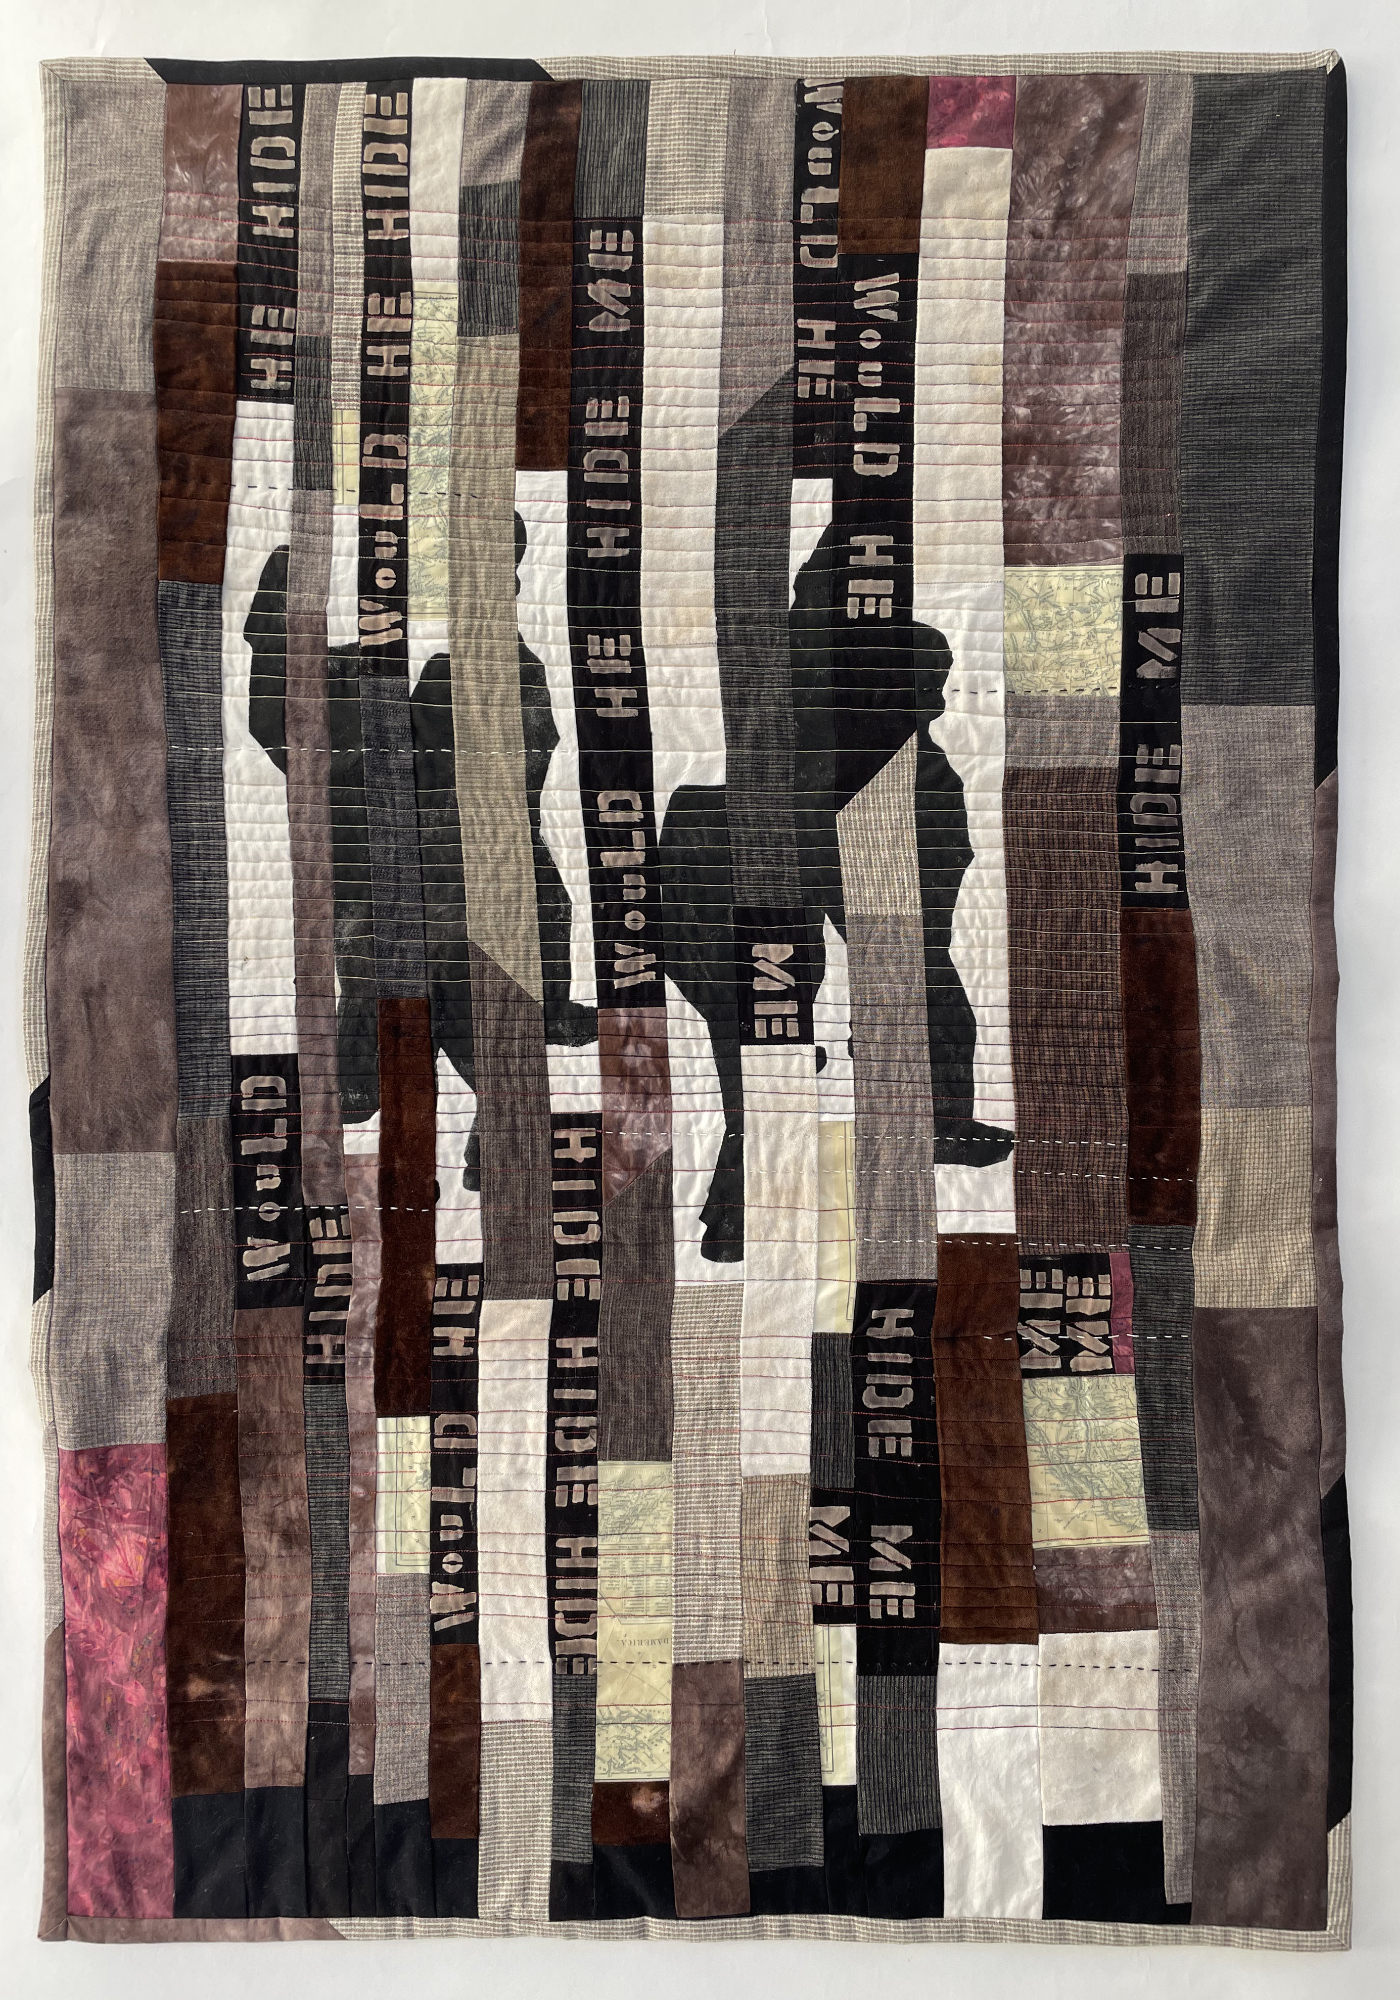 pieced quilt vertical strips of a silhouette interspersed with the words of the title and quilted in horizontal lines